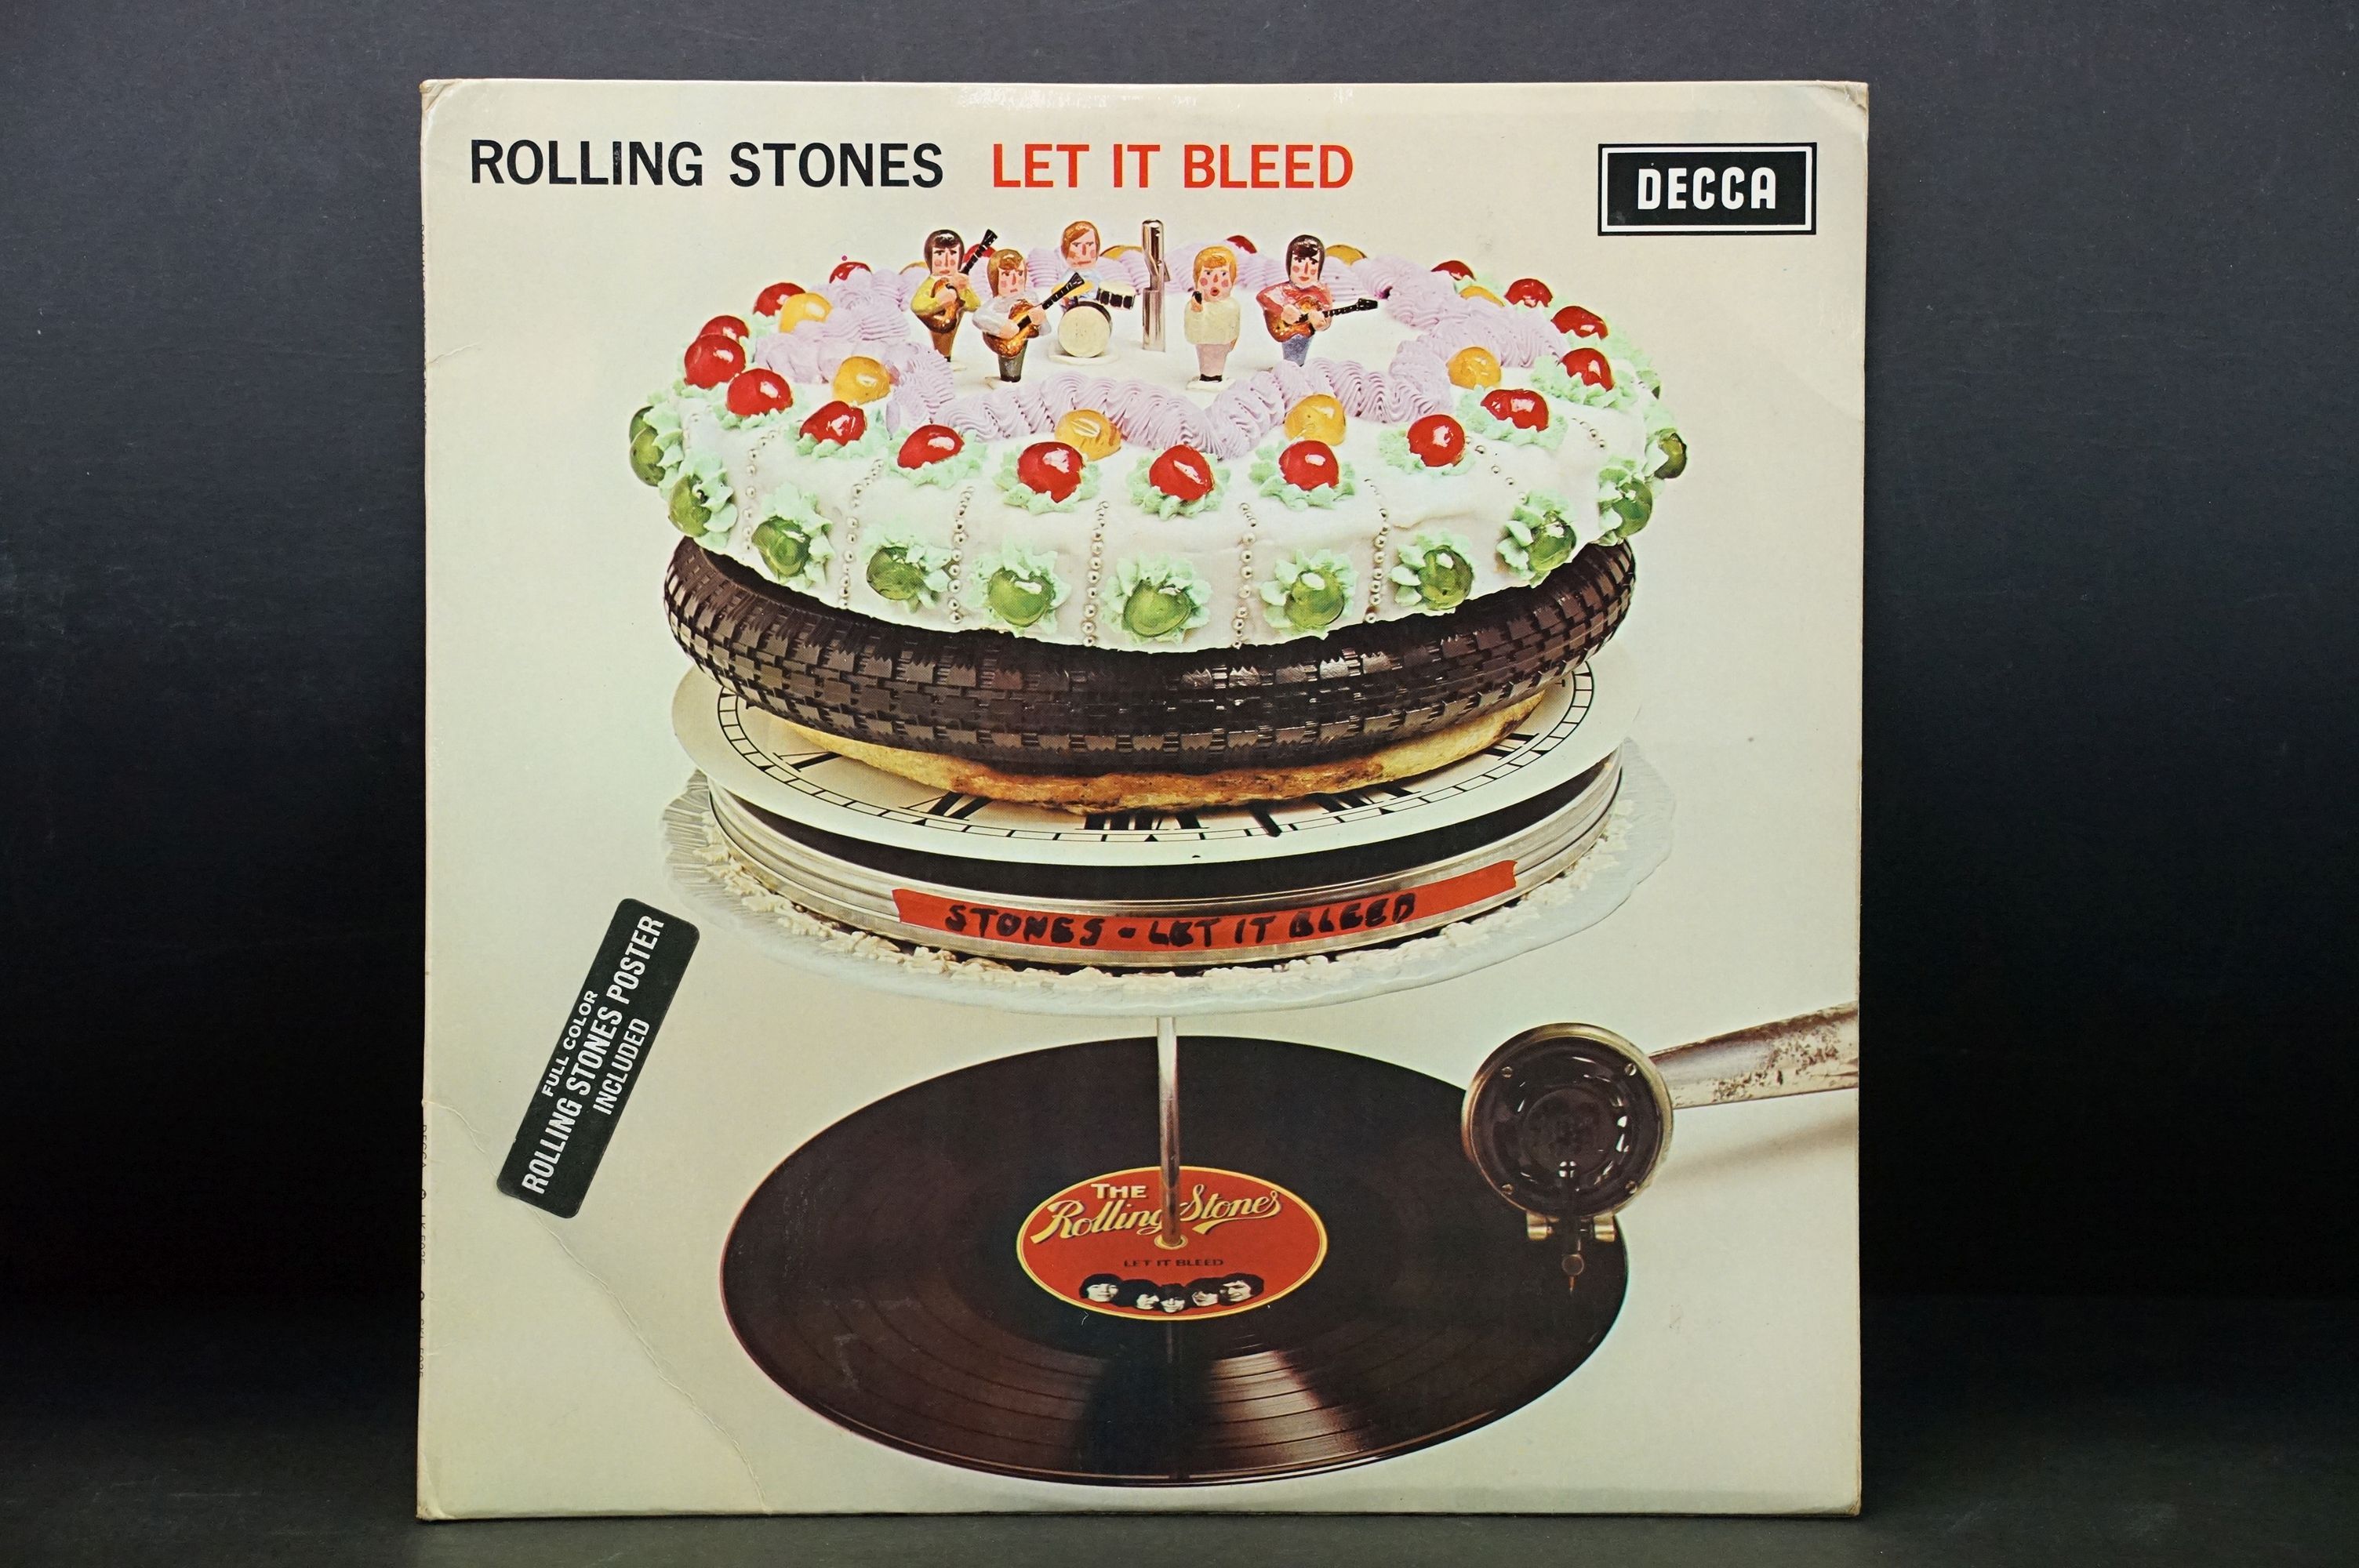 Vinyl - Rolling Stones Let It Bleed on Decca Records LK 5025. Mono pressing with unboxed Decca